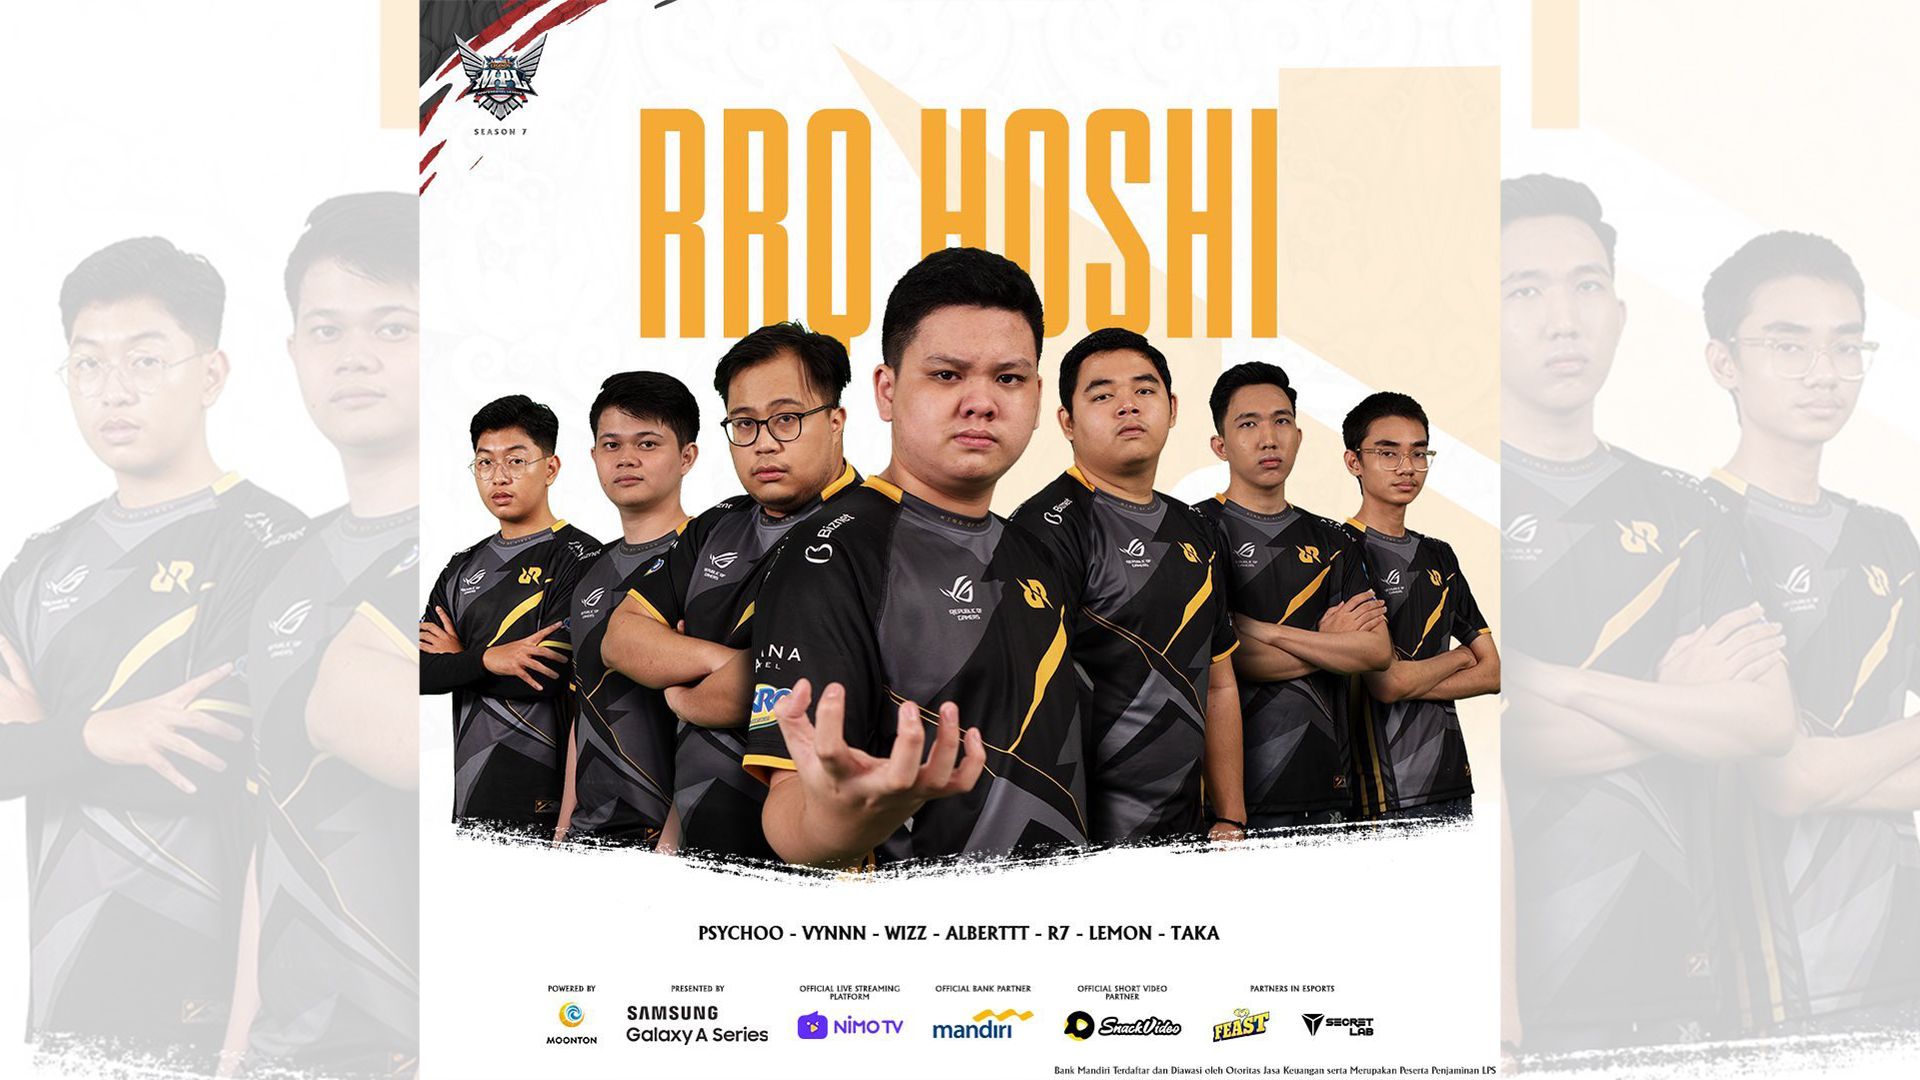 After a slow start, RRQ Hoshi is now first in the MPL ID standings